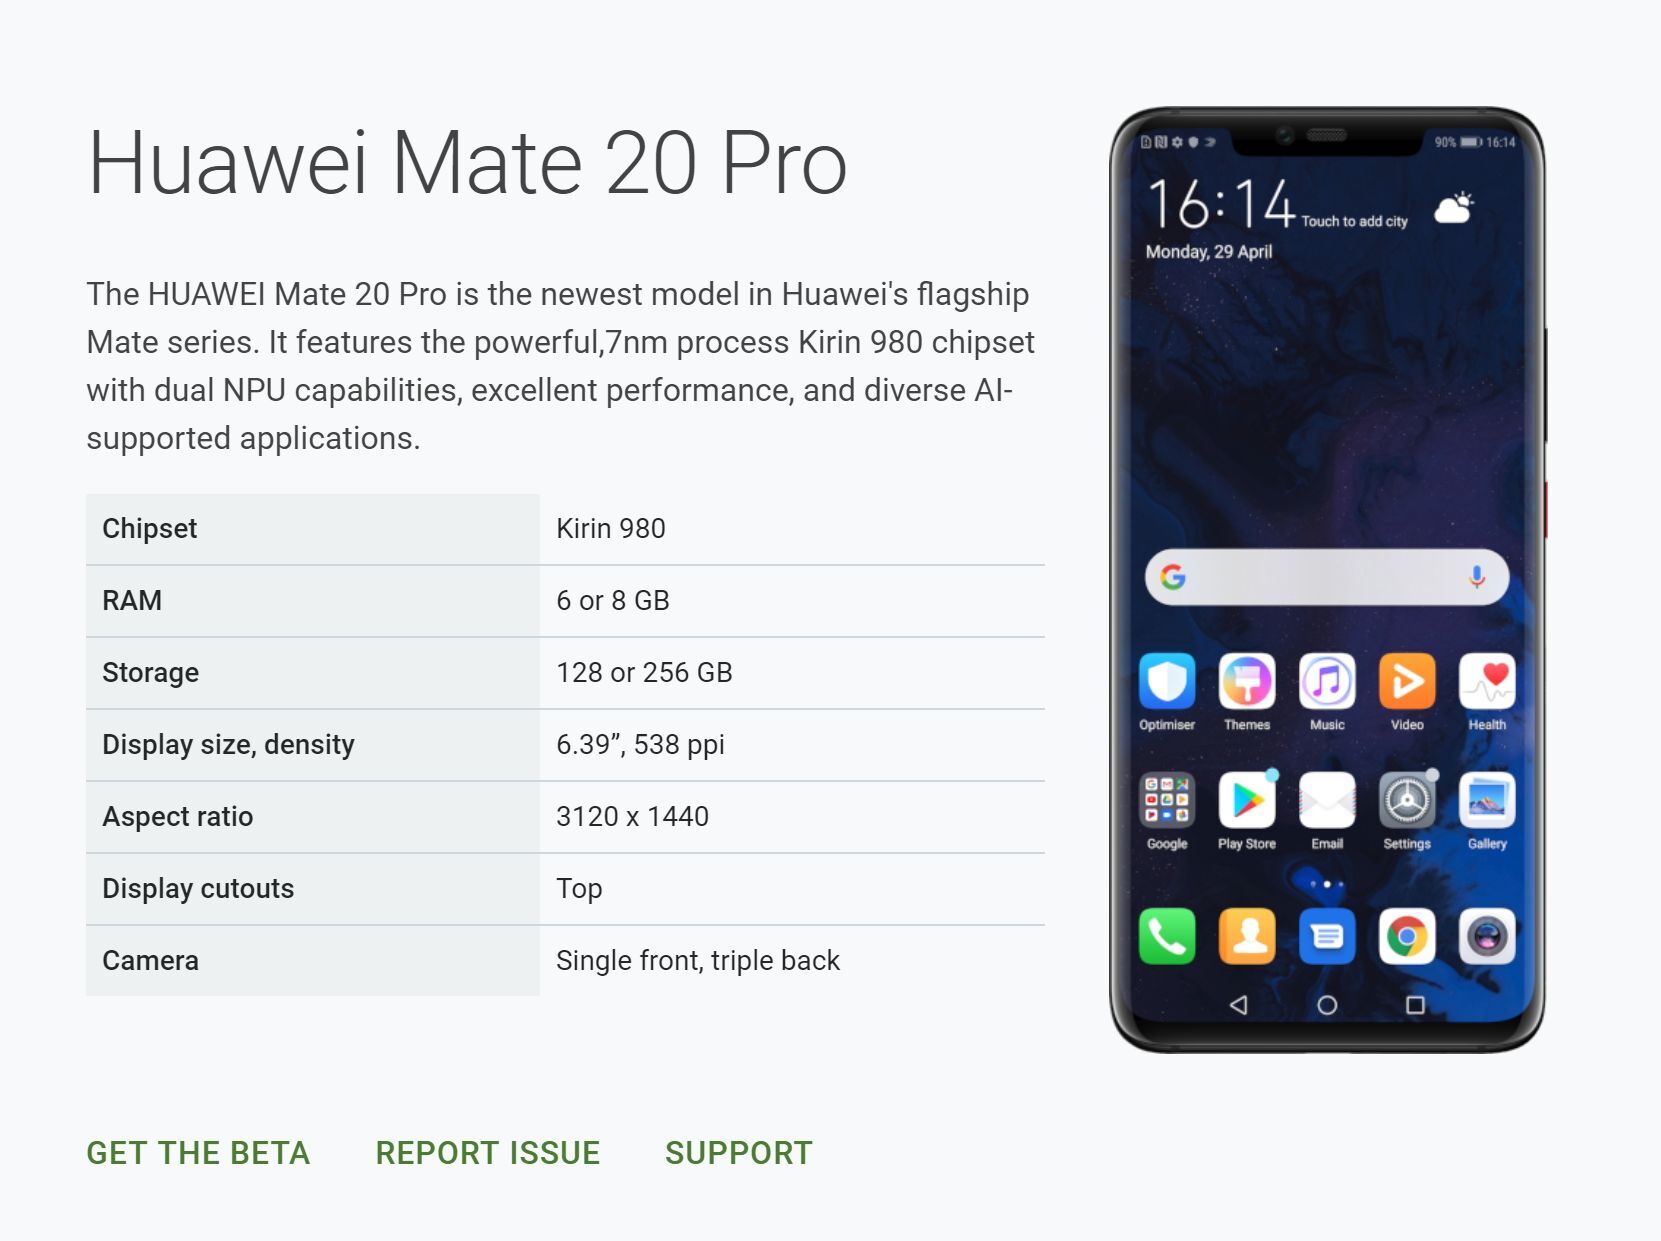 Huawei Mate 20 Pro Android Q Beta